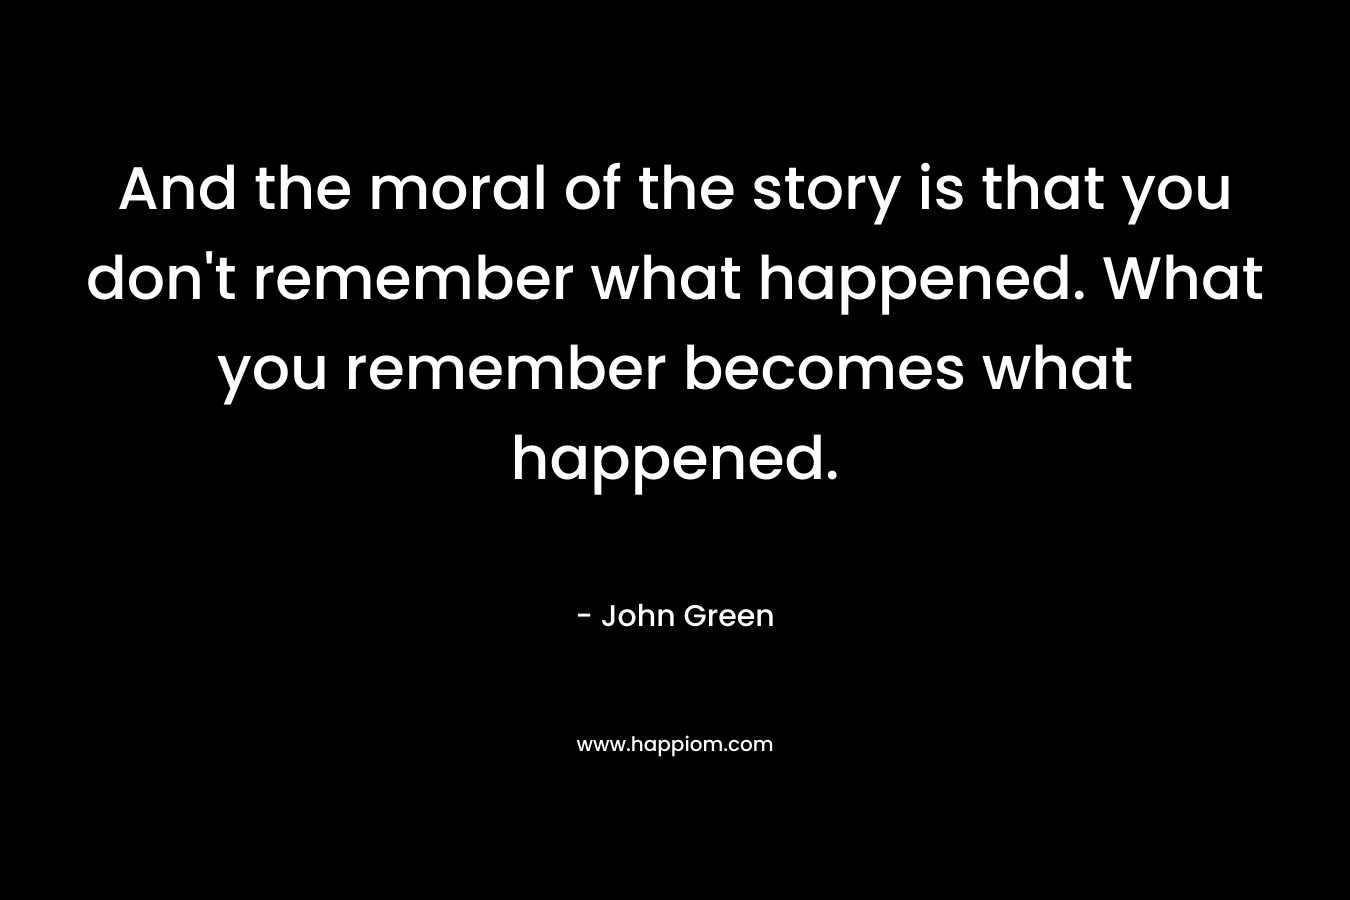 And the moral of the story is that you don't remember what happened. What you remember becomes what happened.